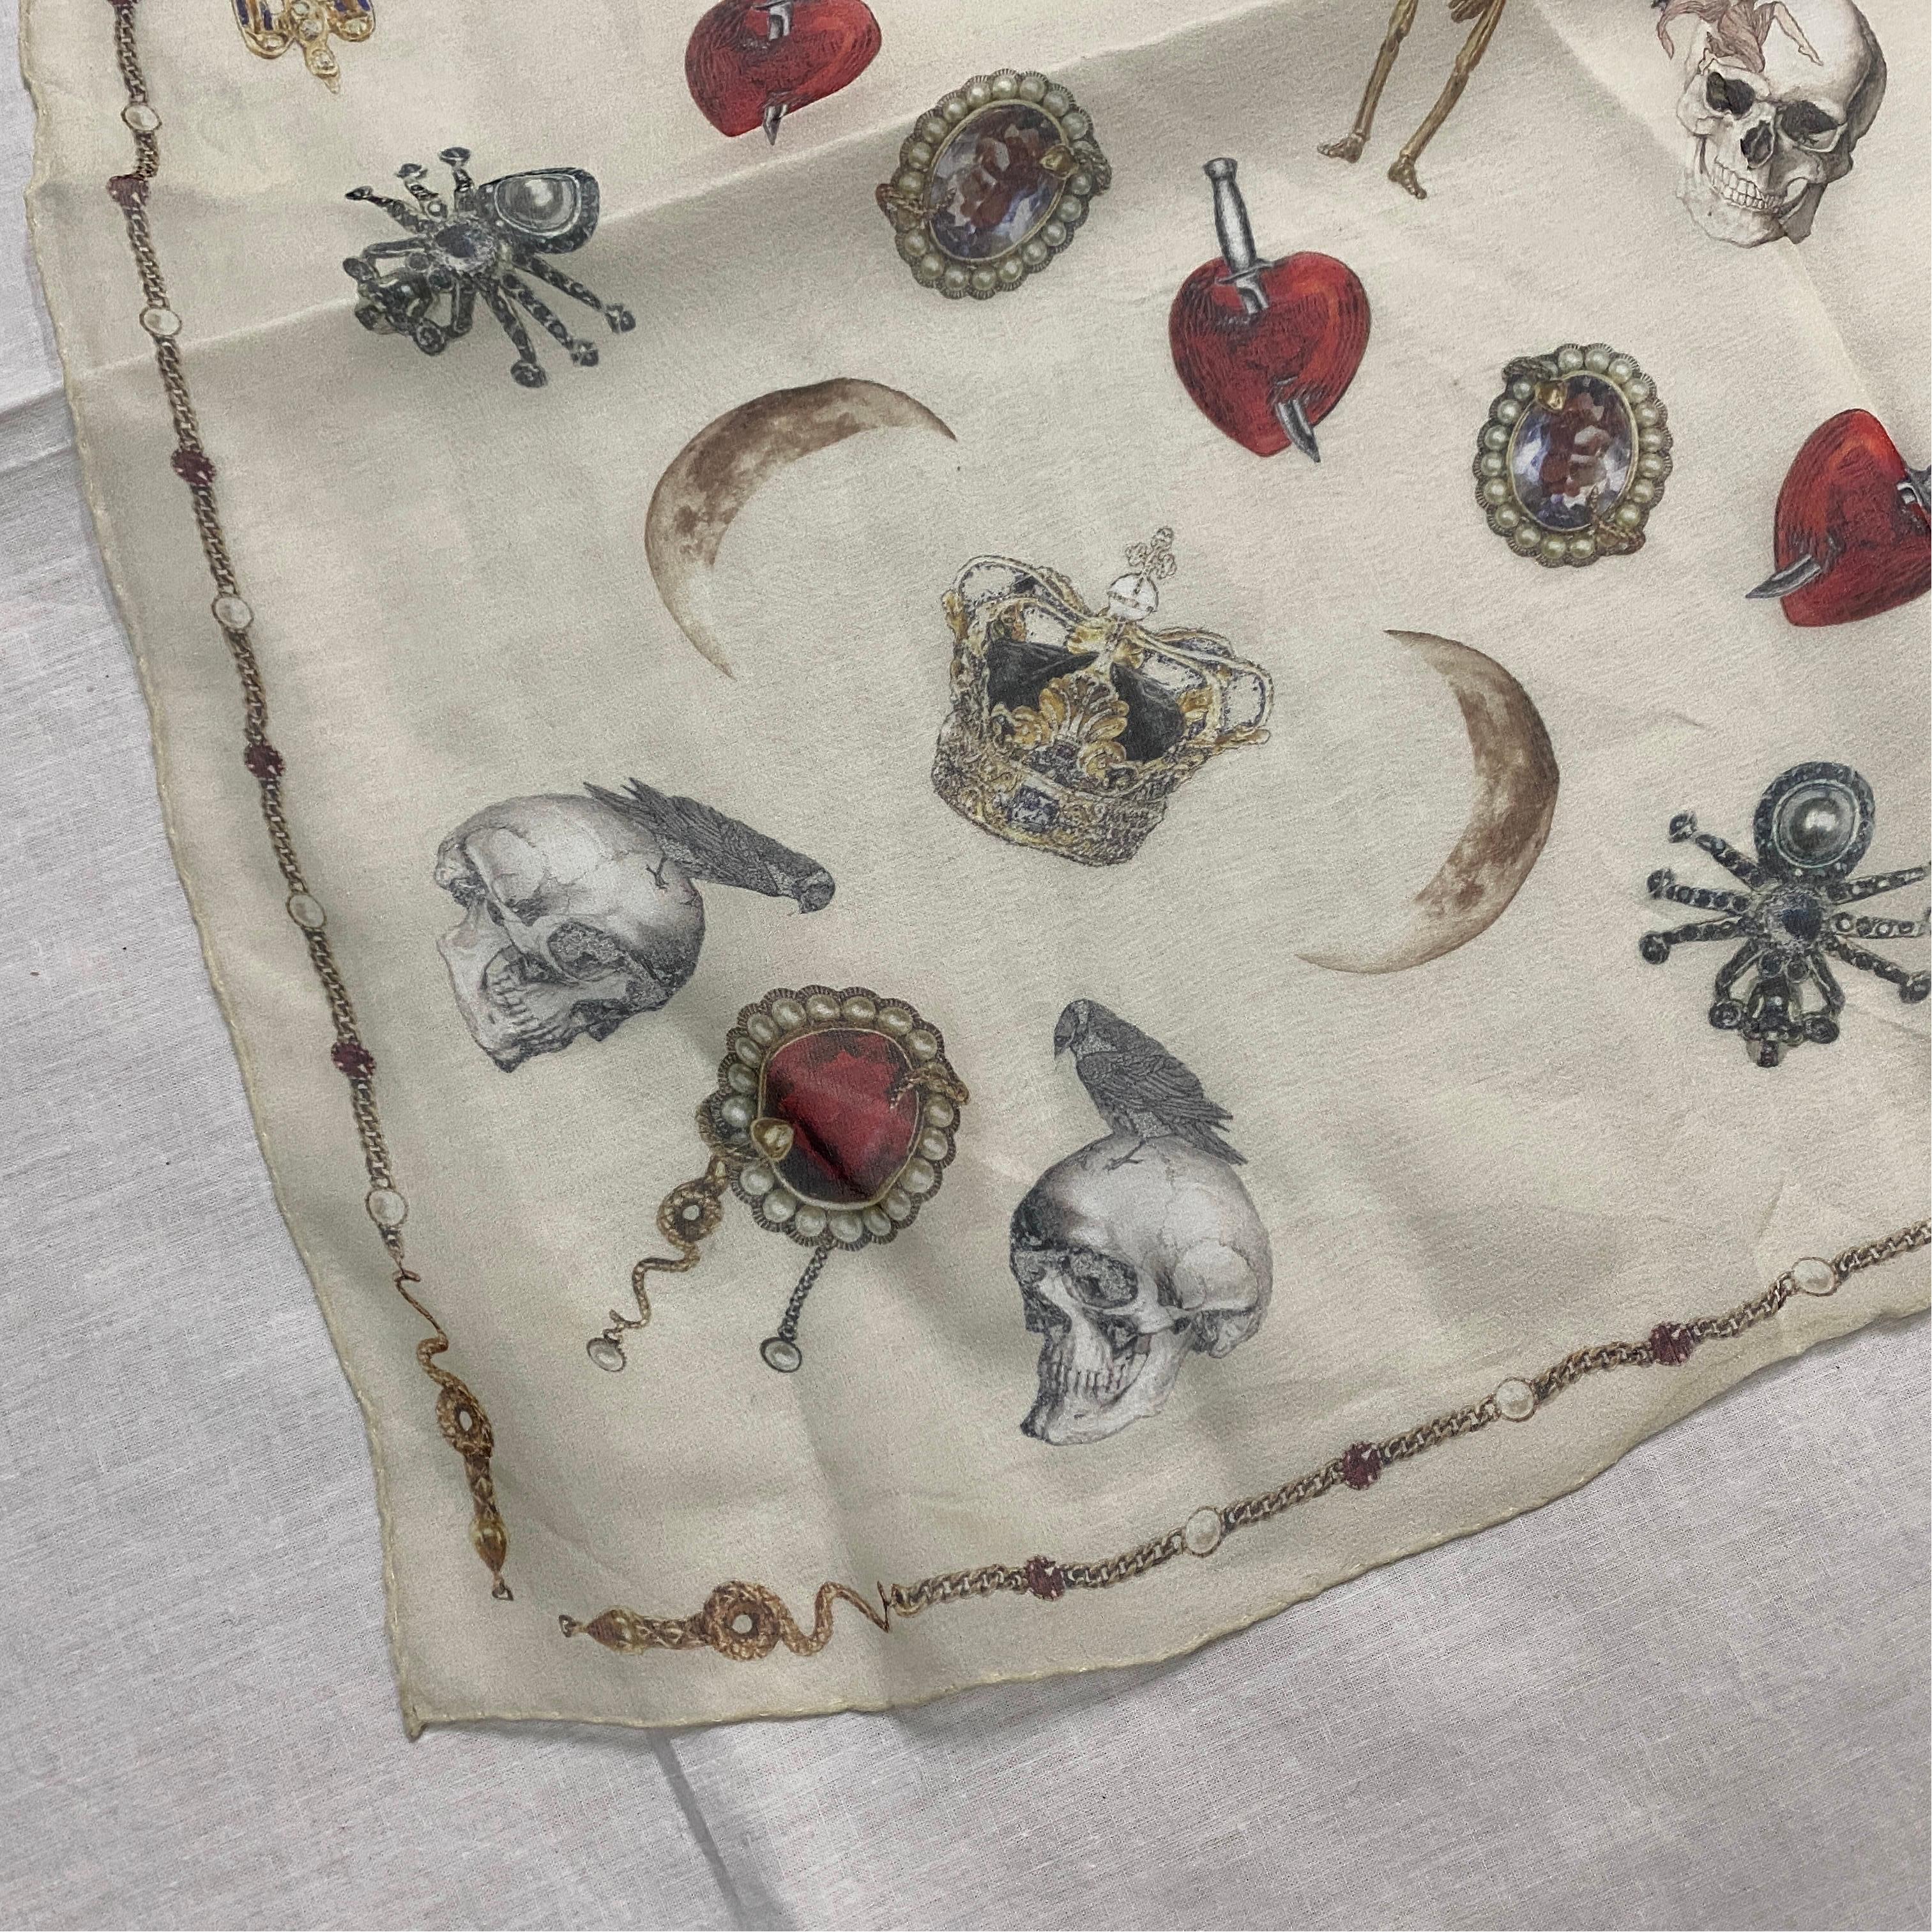 A Silk Scarf by Alexander McQueen manufactured in Italy, with the artist's iconic characteristic decors of skulls flora and fauna.It represents a luxurious and fashion-forward accessory. Alexander McQueen is a renowned British fashion designer known